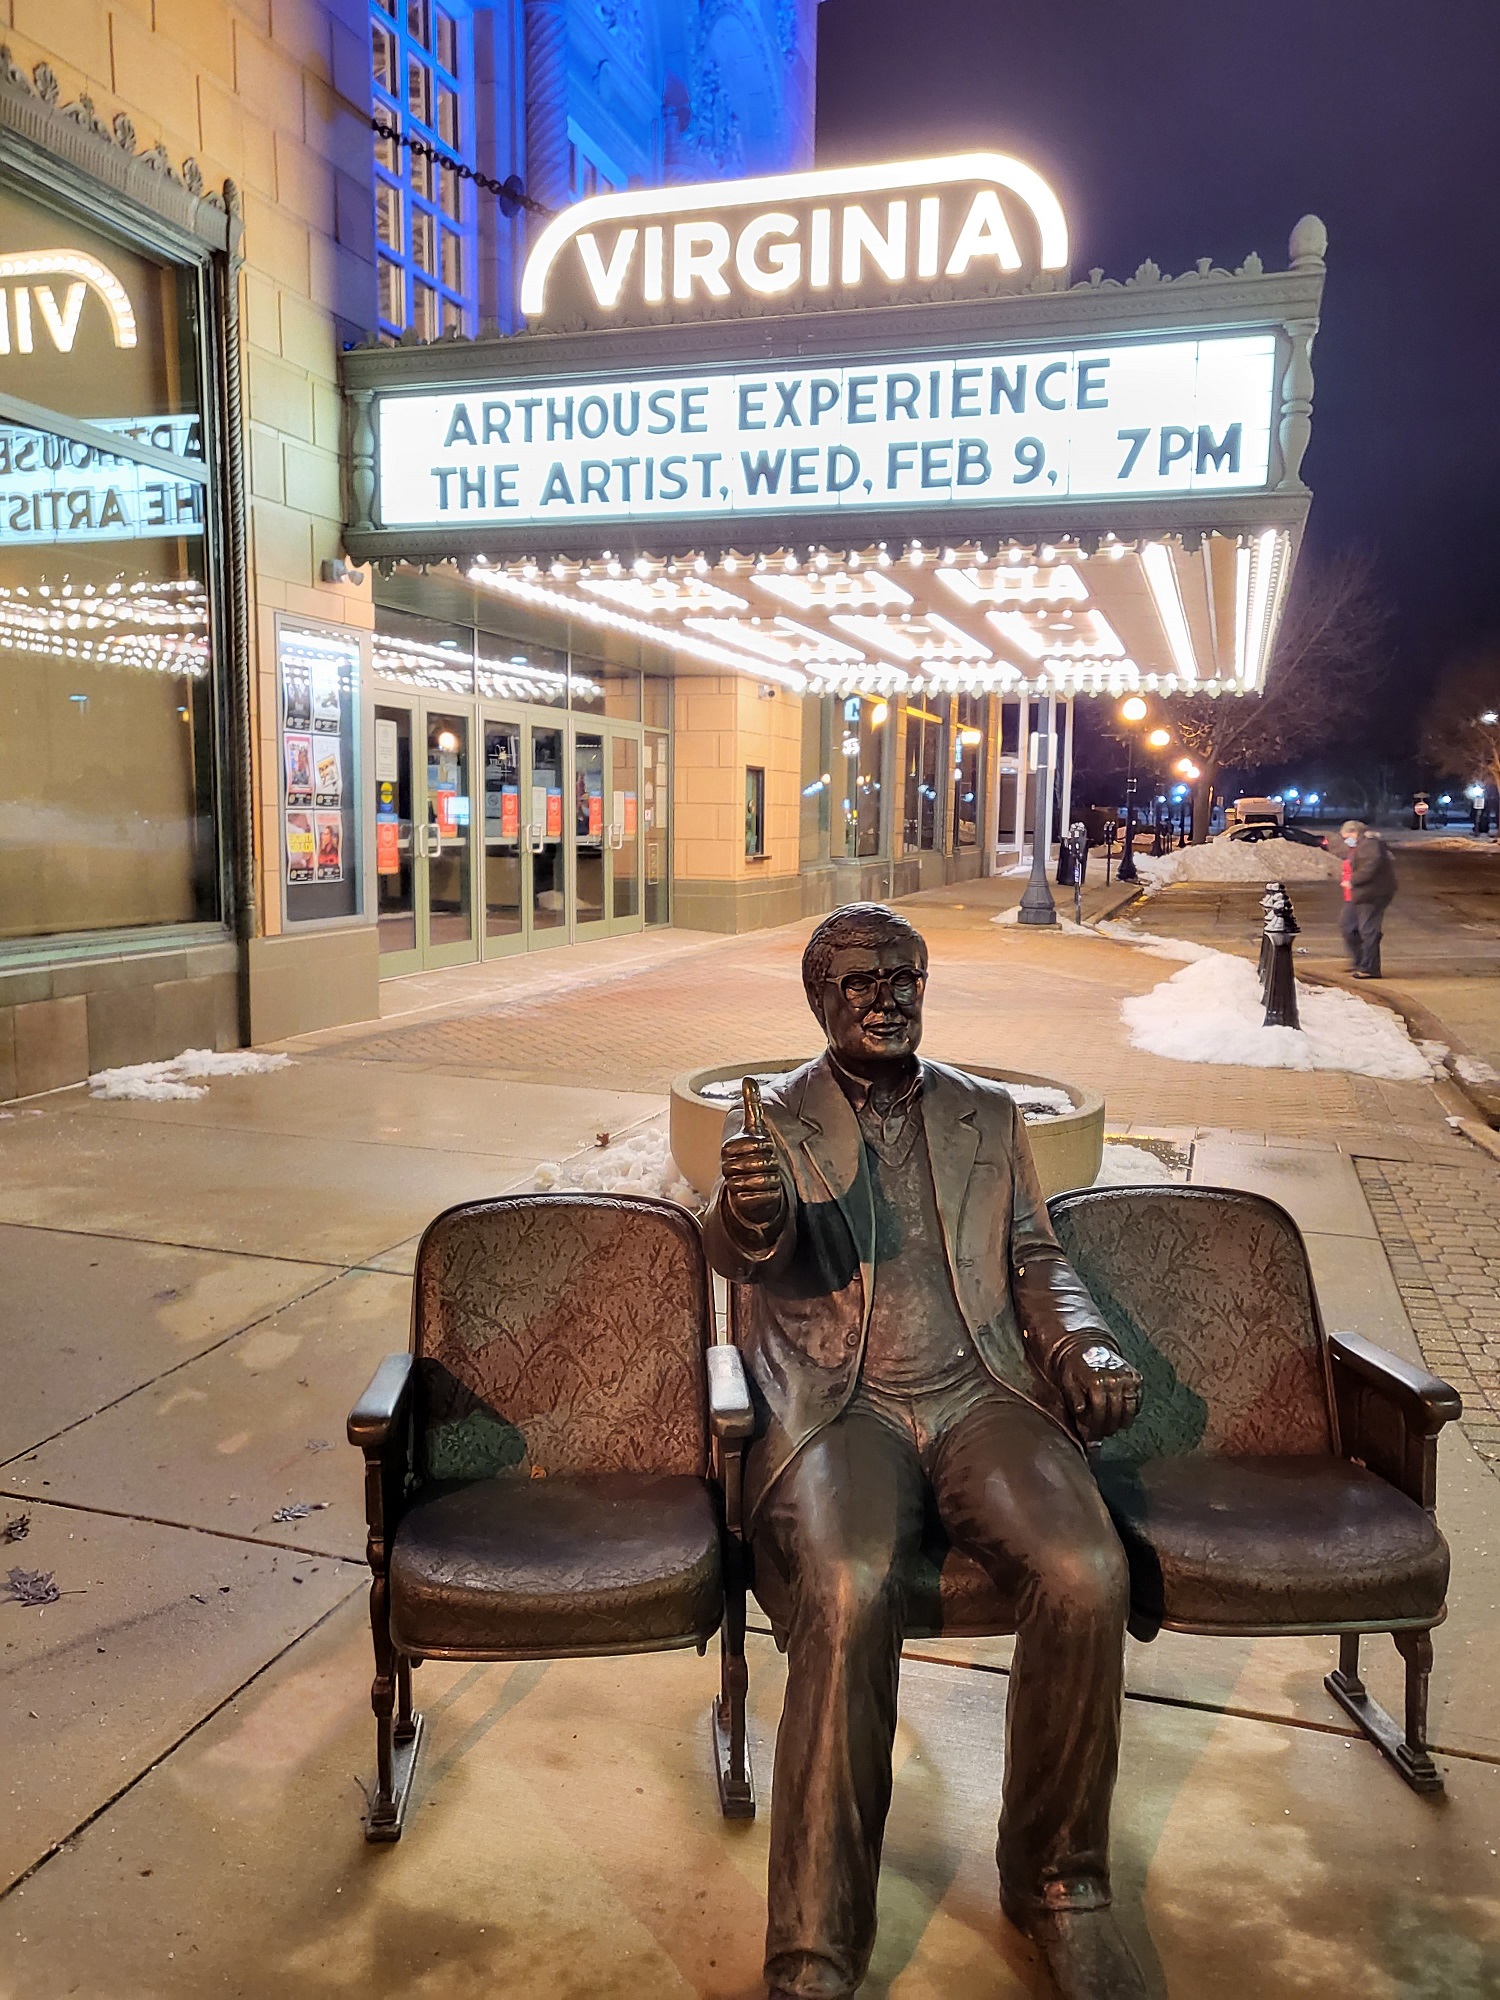 Photo of the Roger Ebert statute in front of the Virginia Theatre with a marquee for 